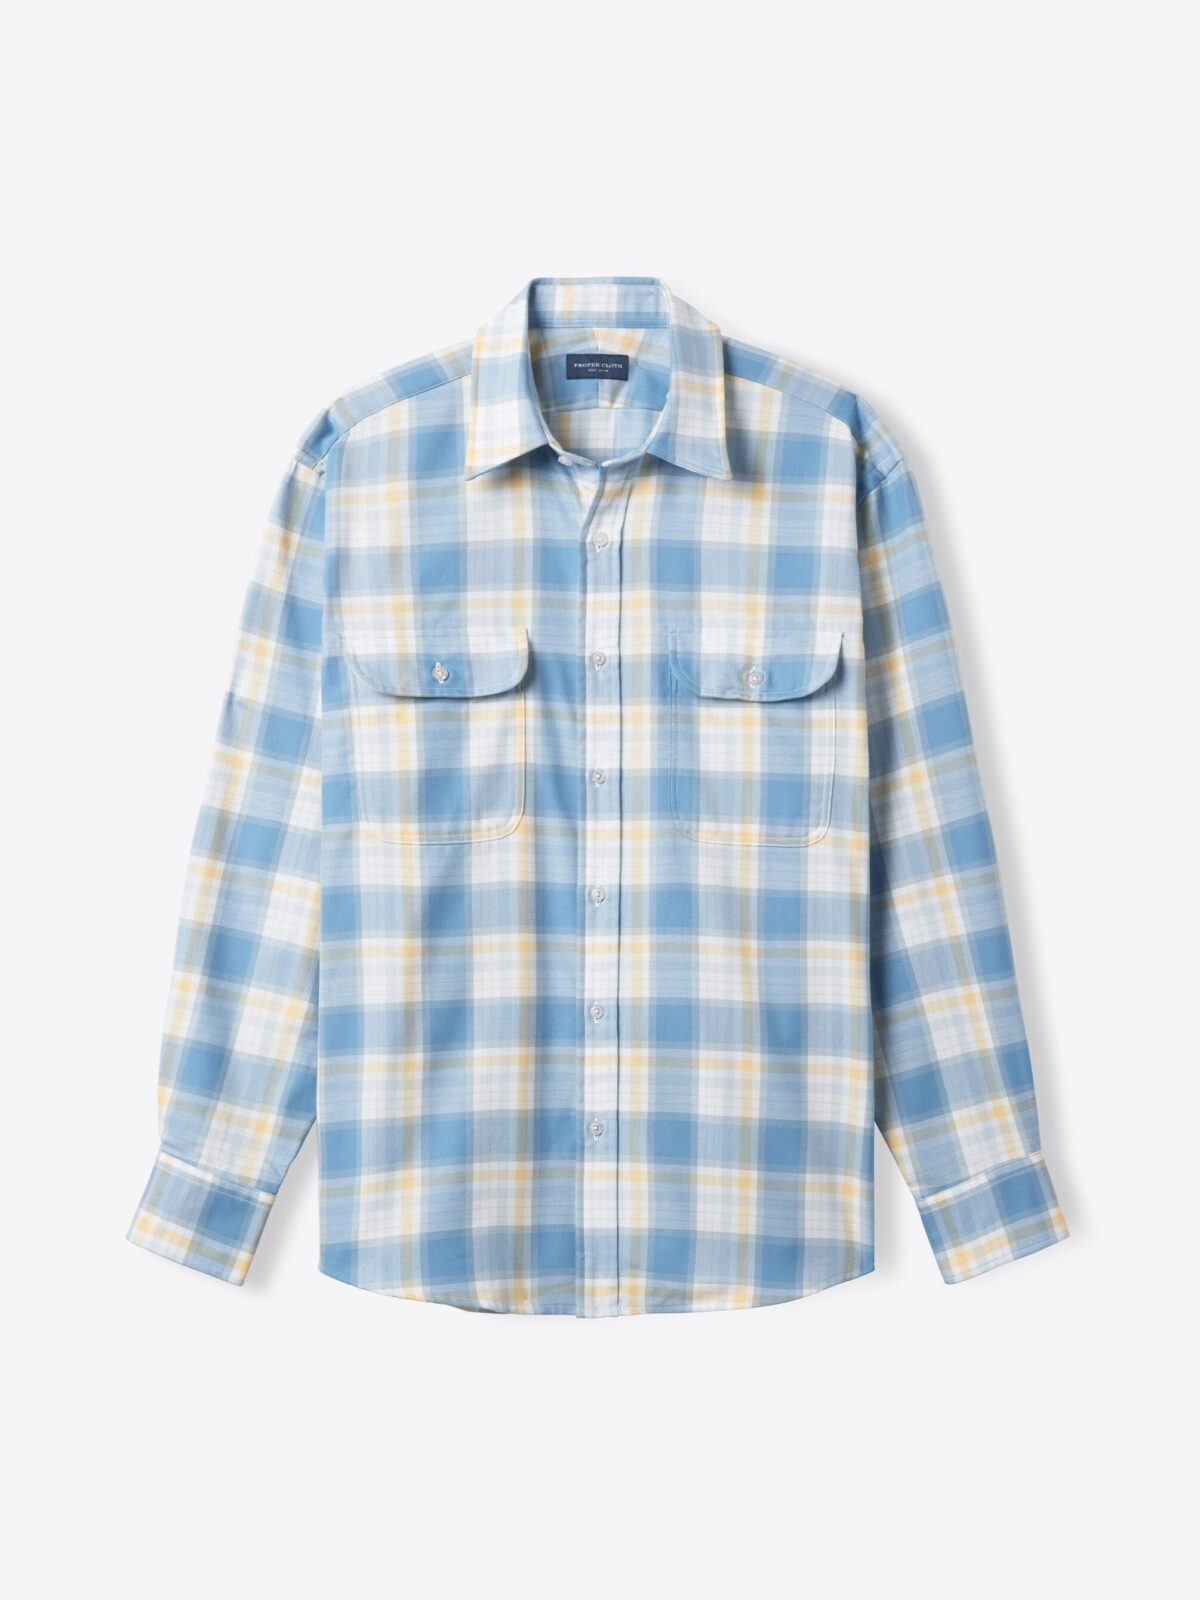 Blue and Yellow California Plaid Shirt by Proper Cloth